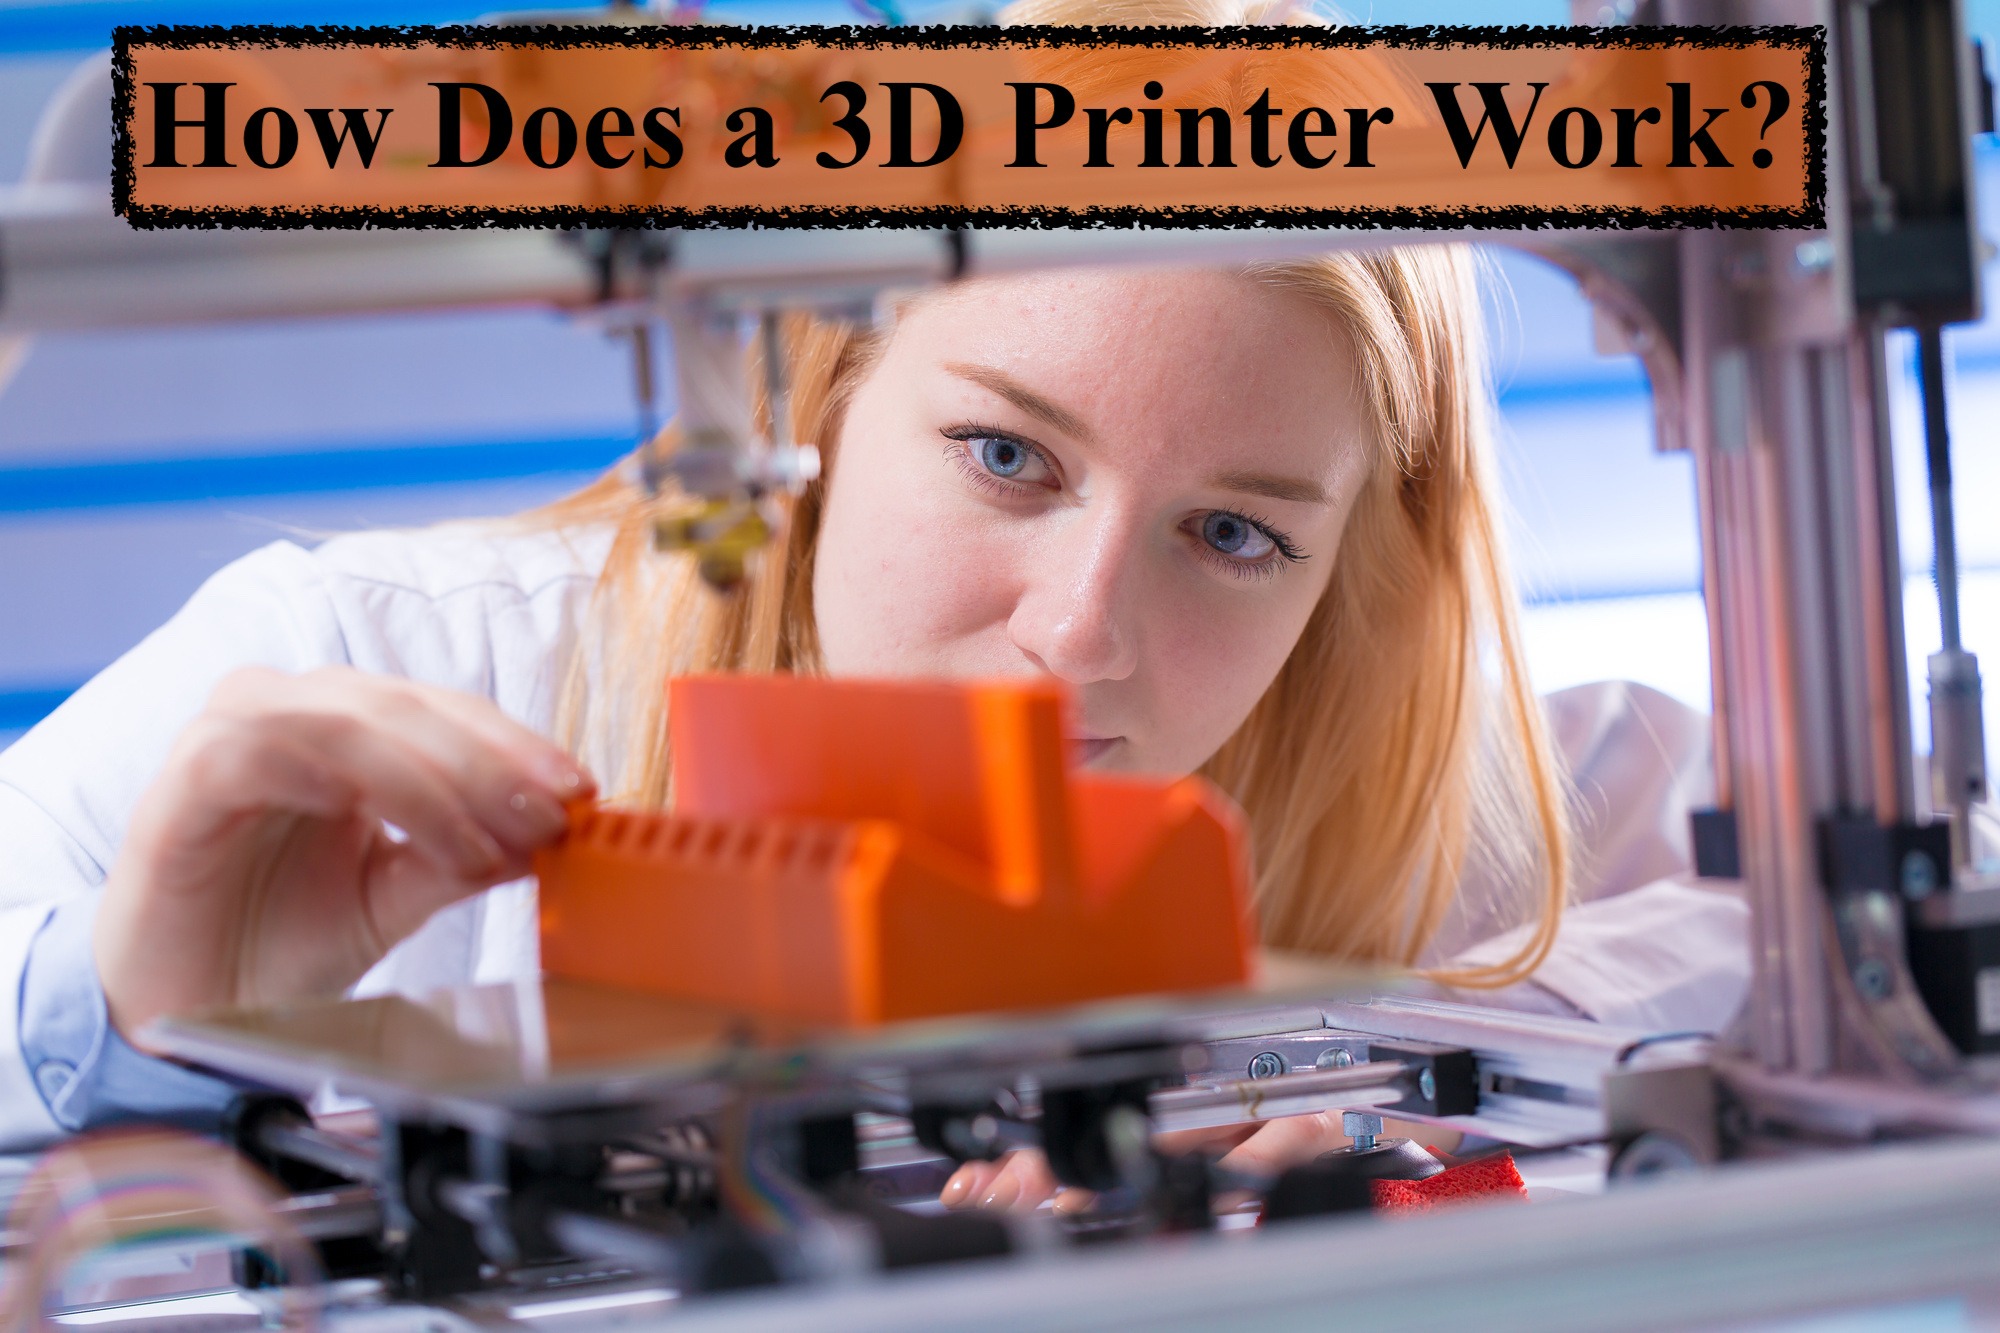 How Does a 3D Printer Work? A Guide on What